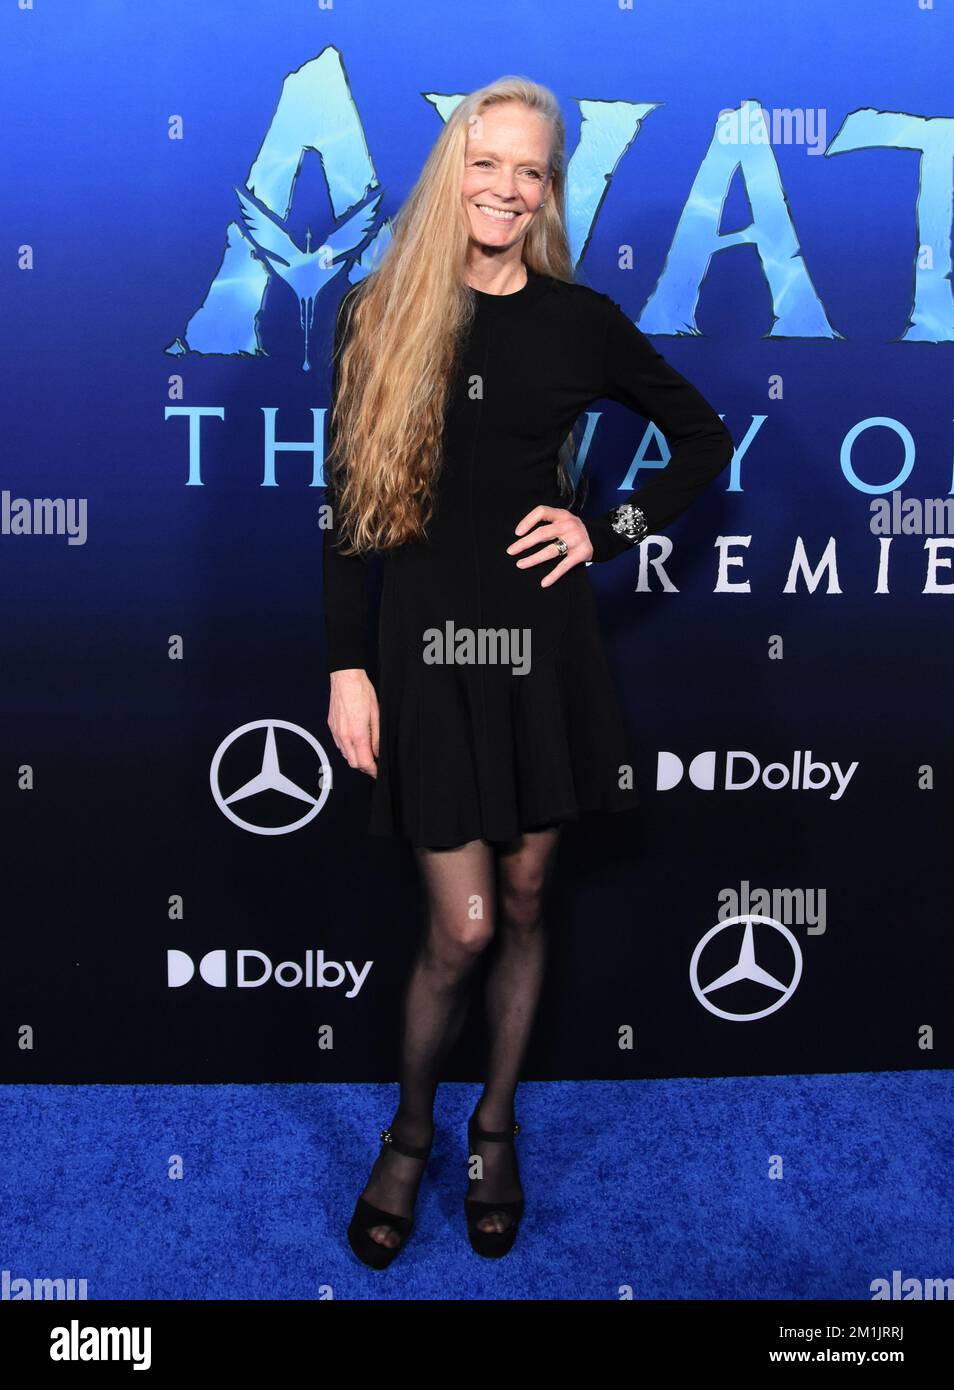 Hollywood, California, USA 12th December 2022 Actress Suzy Amis Cameron attends 20th Century Studio's 'Avatar 2: The Way of Water' U.S. Premiere at Dolby Theatre on December 12, 2022 in Hollywood, California, USA. Photo by Barry King/Alamy Live News Stock Photo